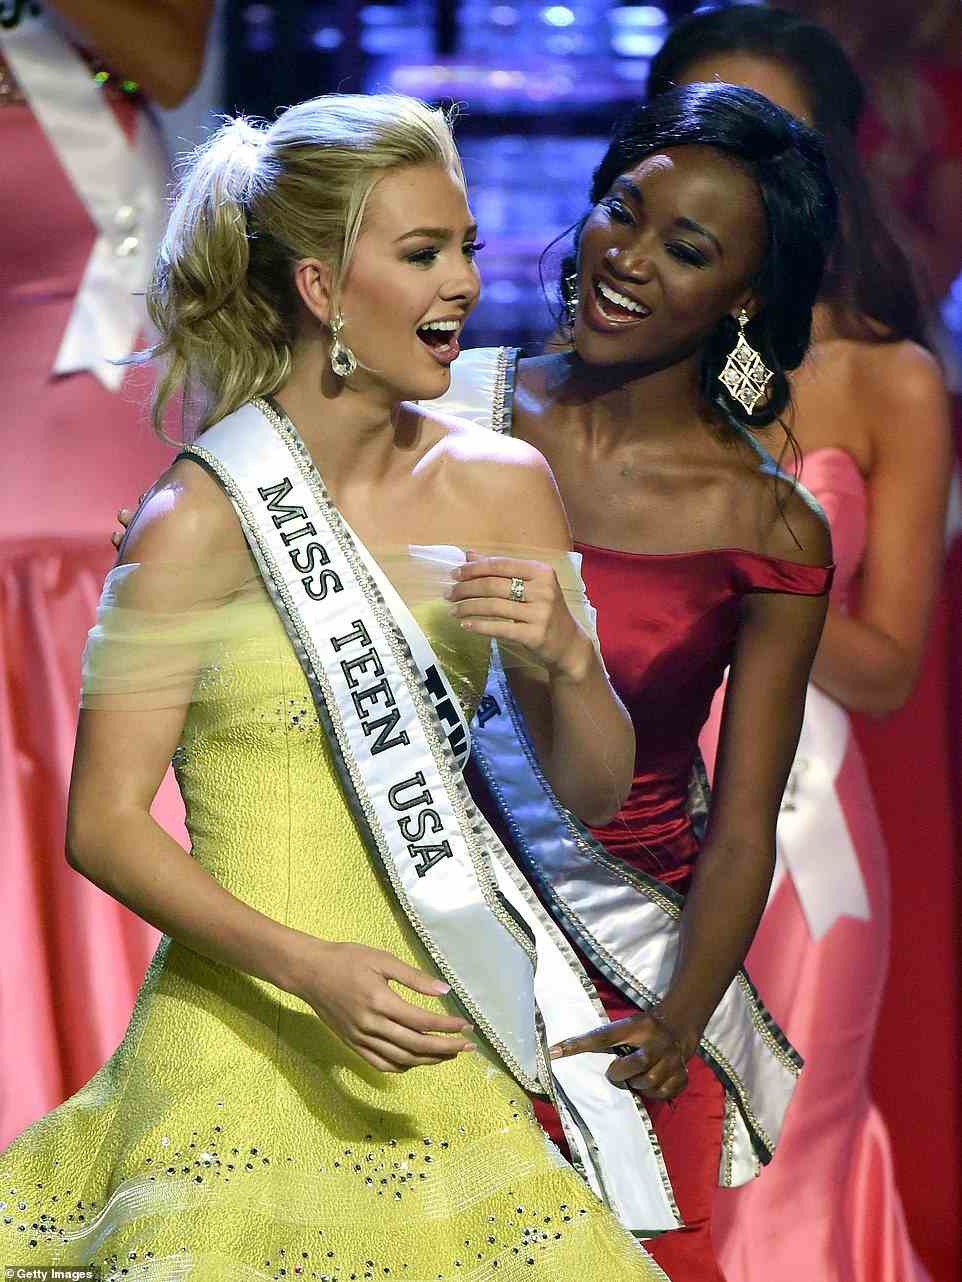 Karlie Hay, now 24, from Texas, sparked controversy when old tweets containing racial slurs resurfaced after she took home the Miss Teen USA title in 2016